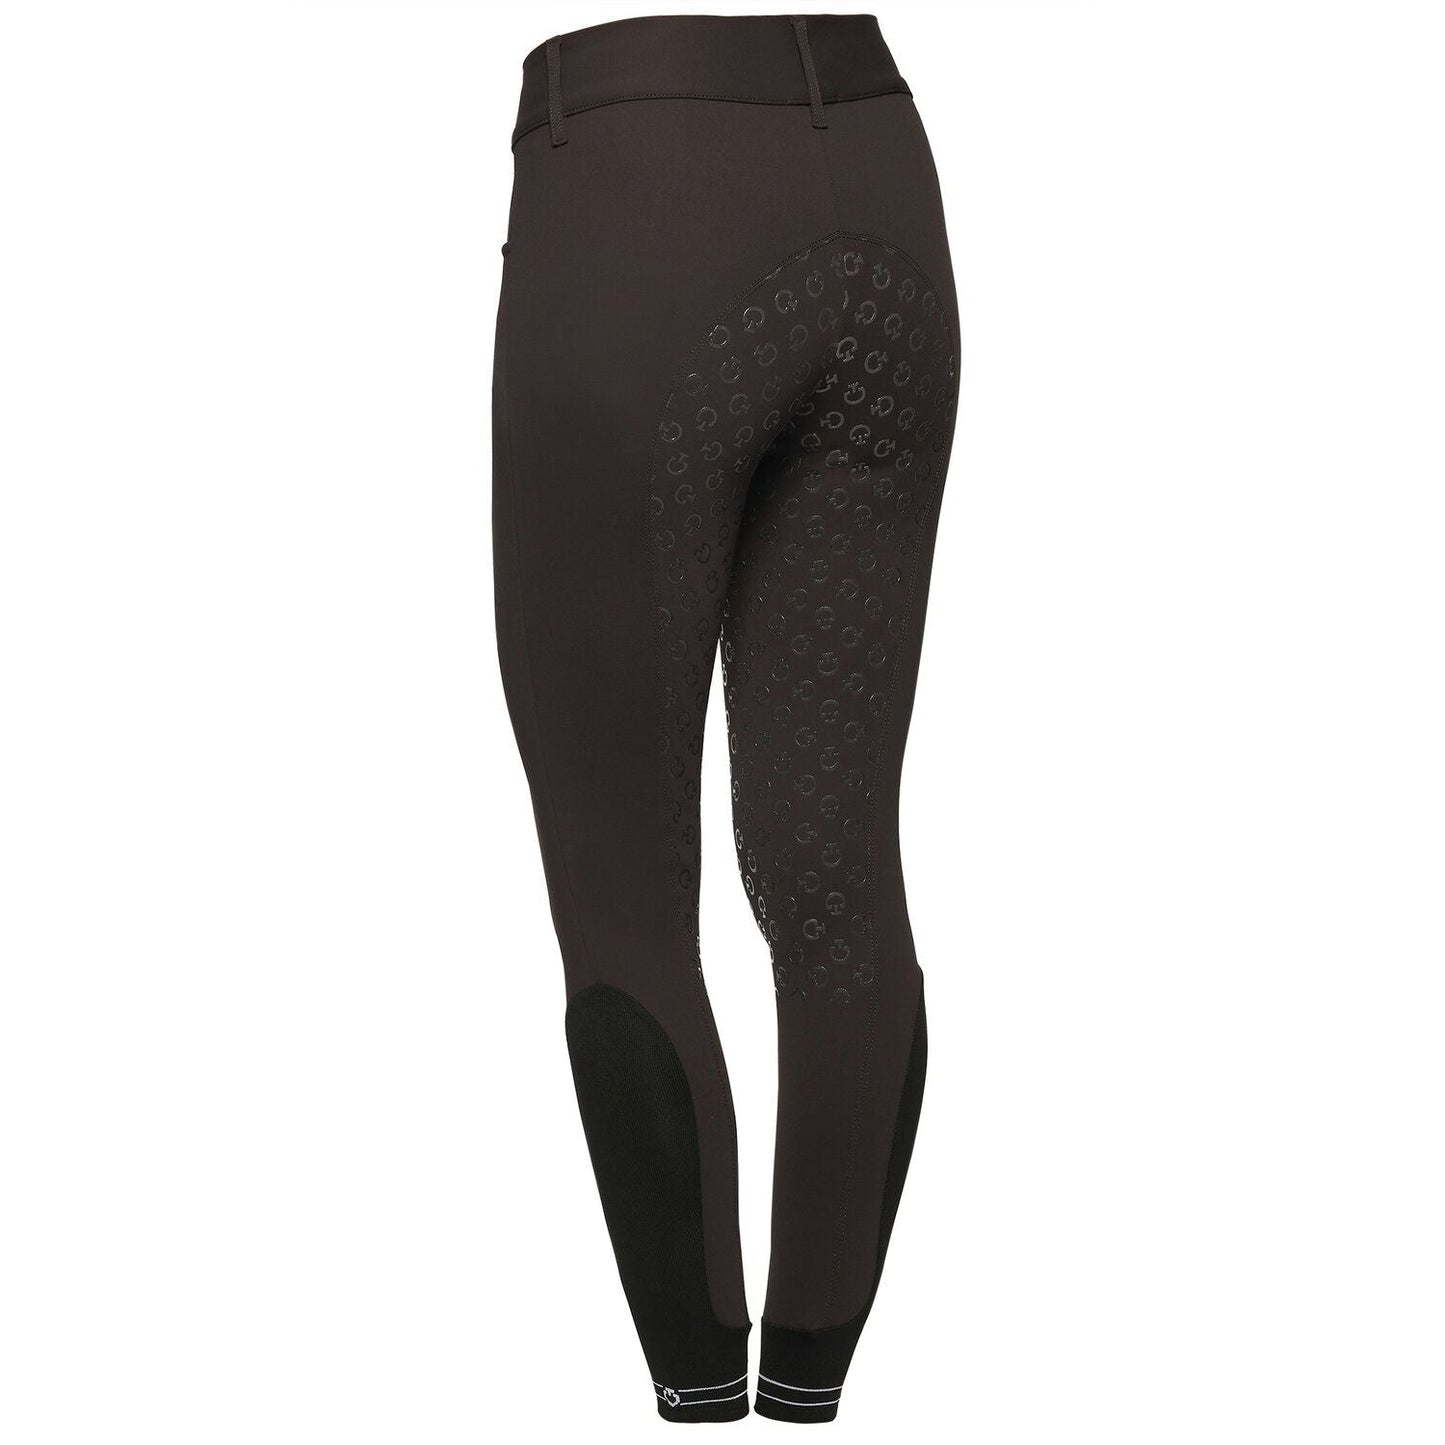 American Full Grip Breeches - Piquet - Chocolate-Trailrace Equestrian Outfitters-The Equestrian